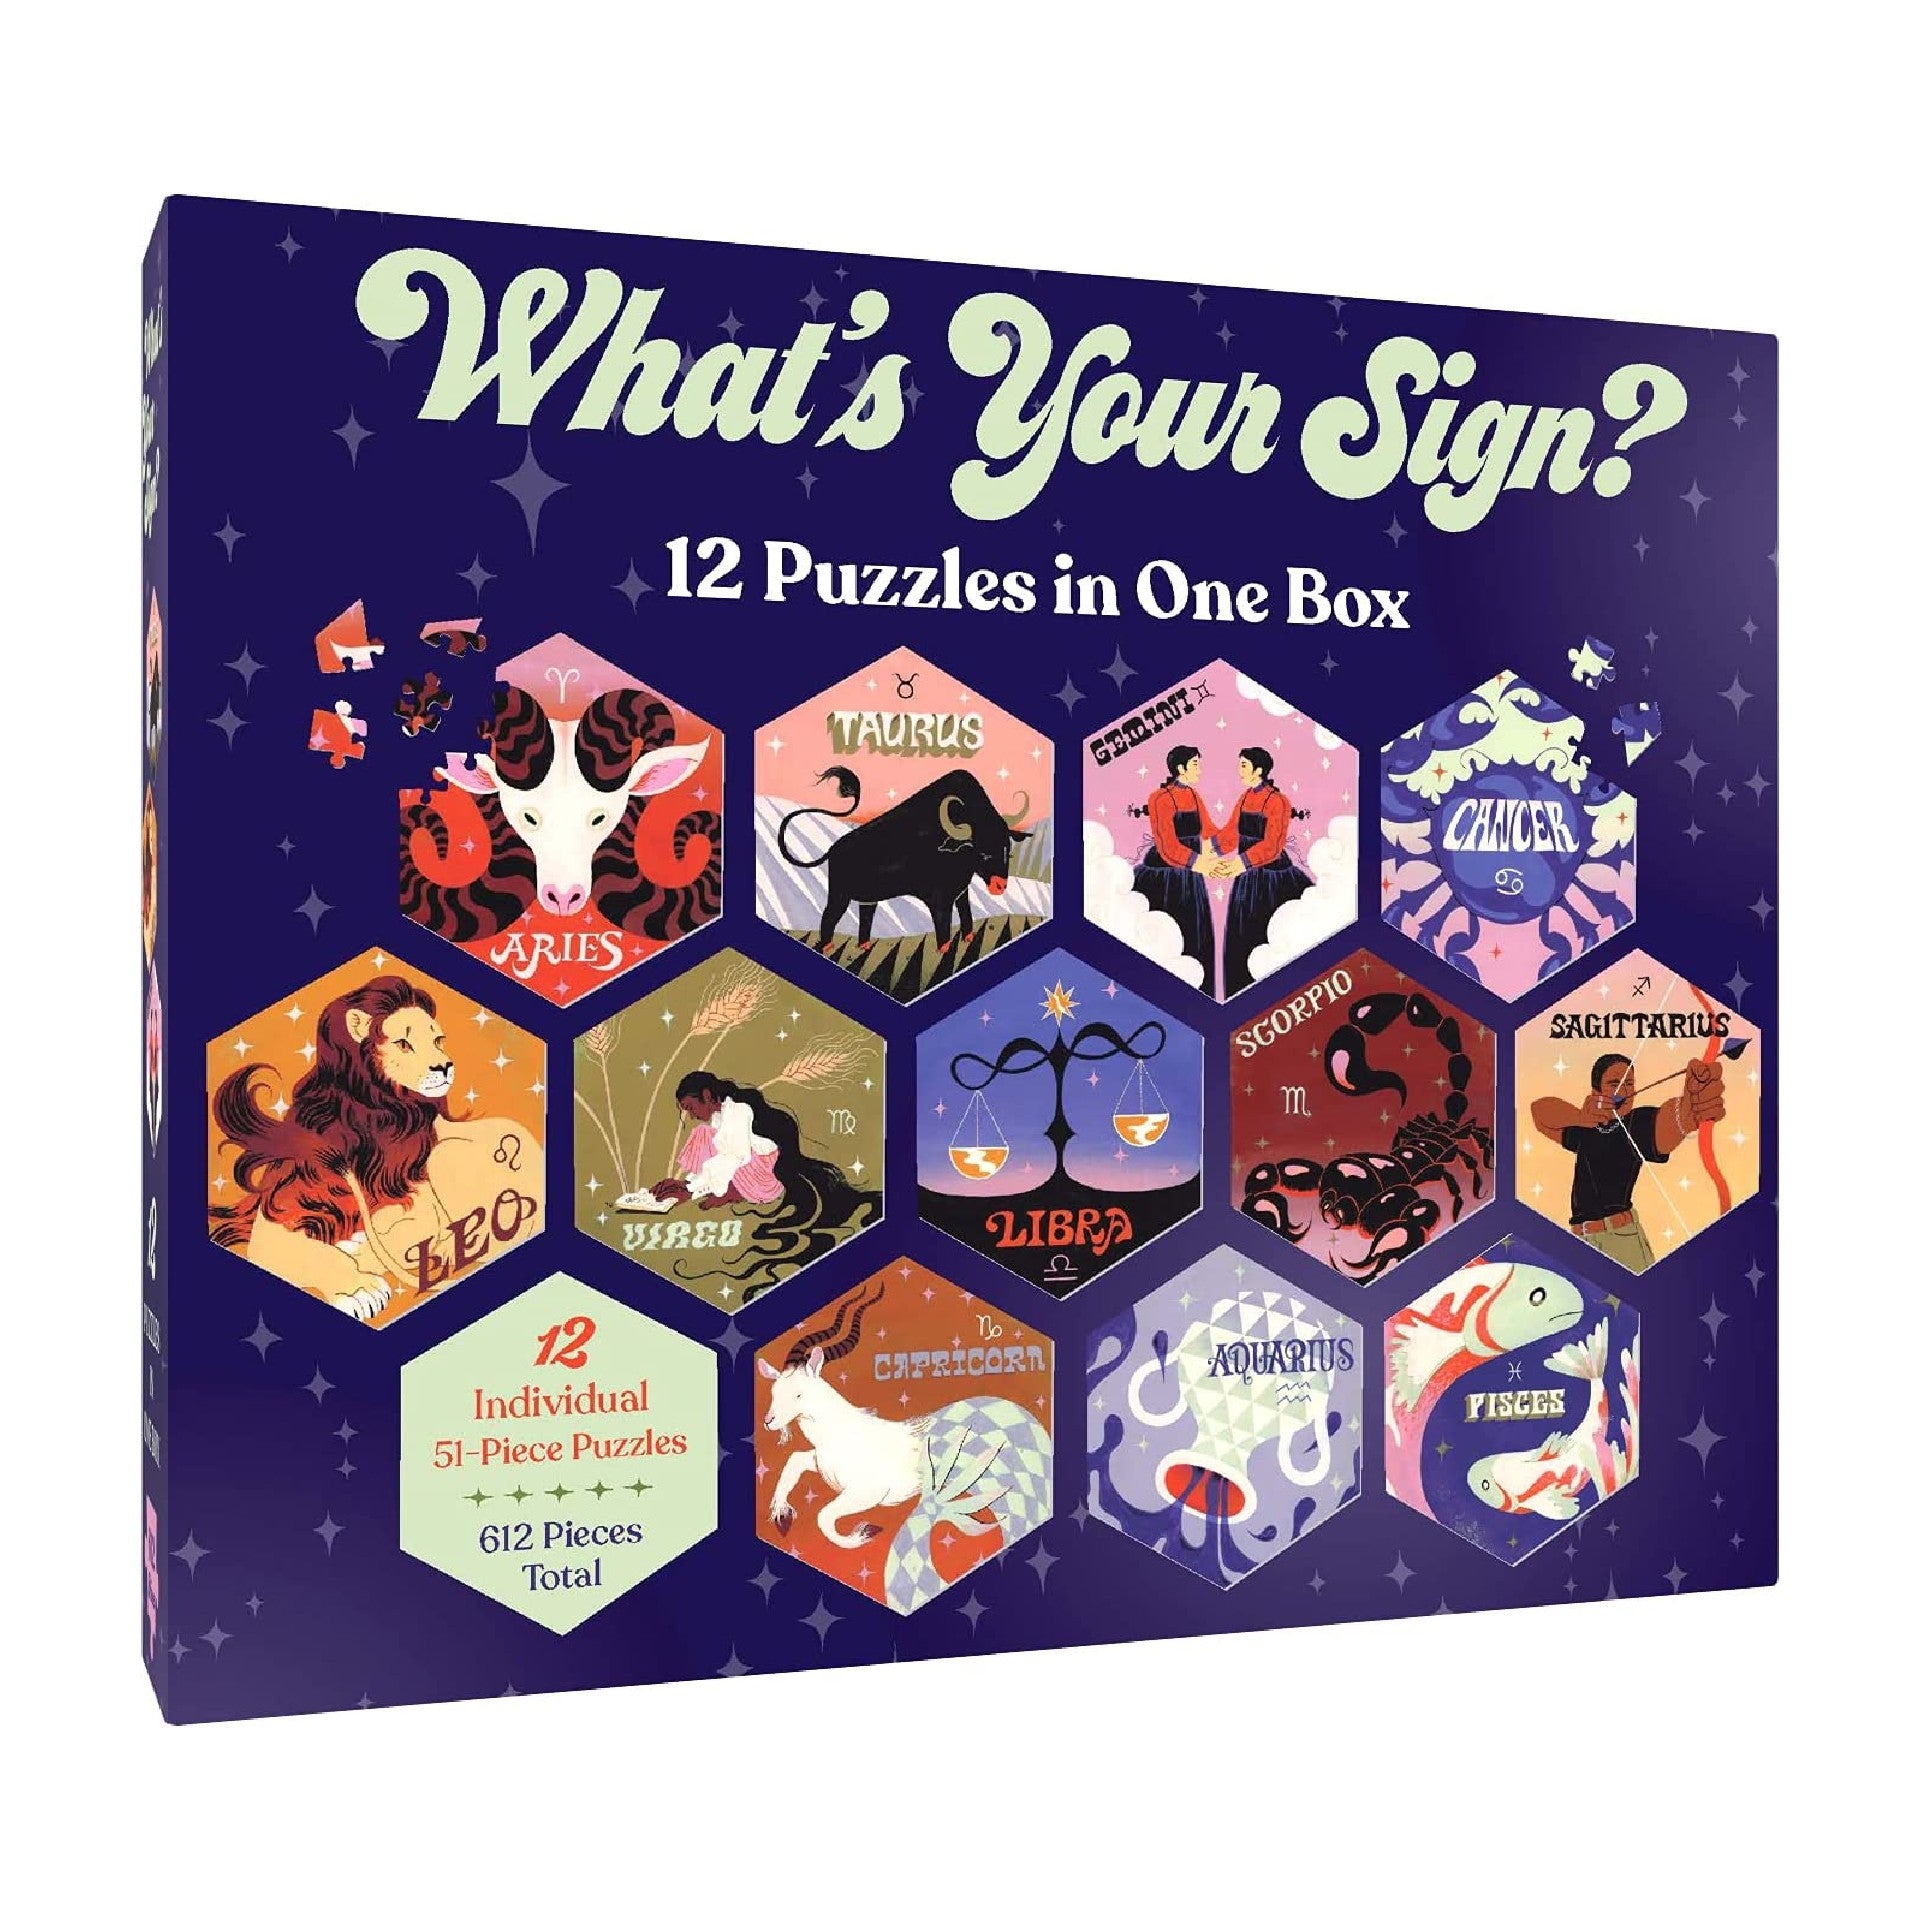 What's Your Sign 12 Puzzles